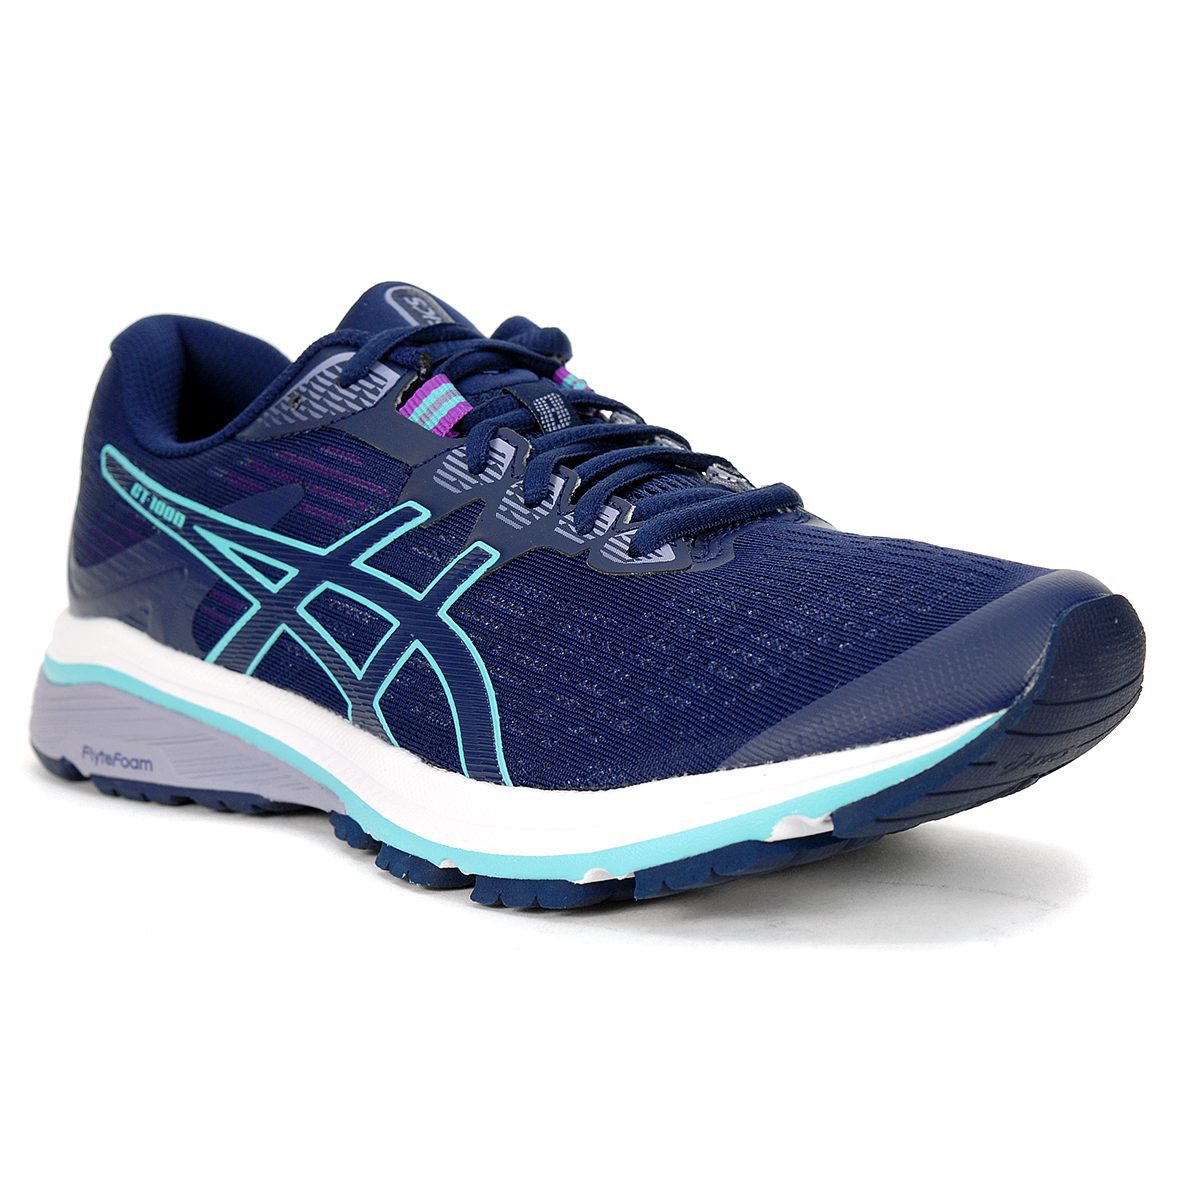 ASICS Women's GT-1000 8 Peacoat/Ice Mint Running Shoes 1012A460.401 ...